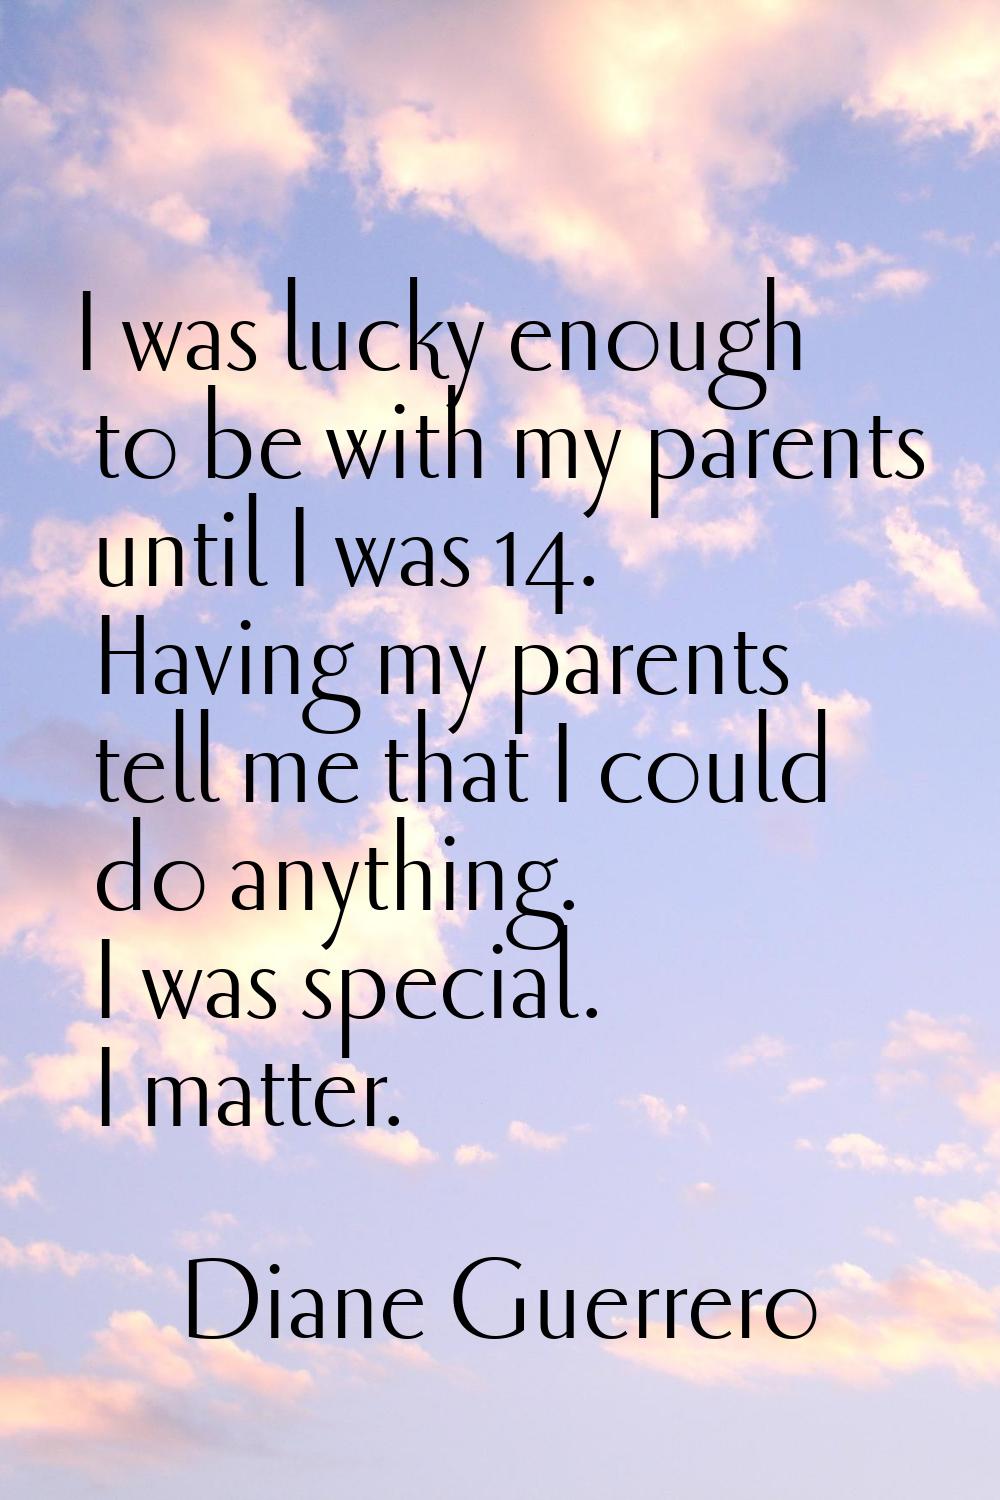 I was lucky enough to be with my parents until I was 14. Having my parents tell me that I could do 